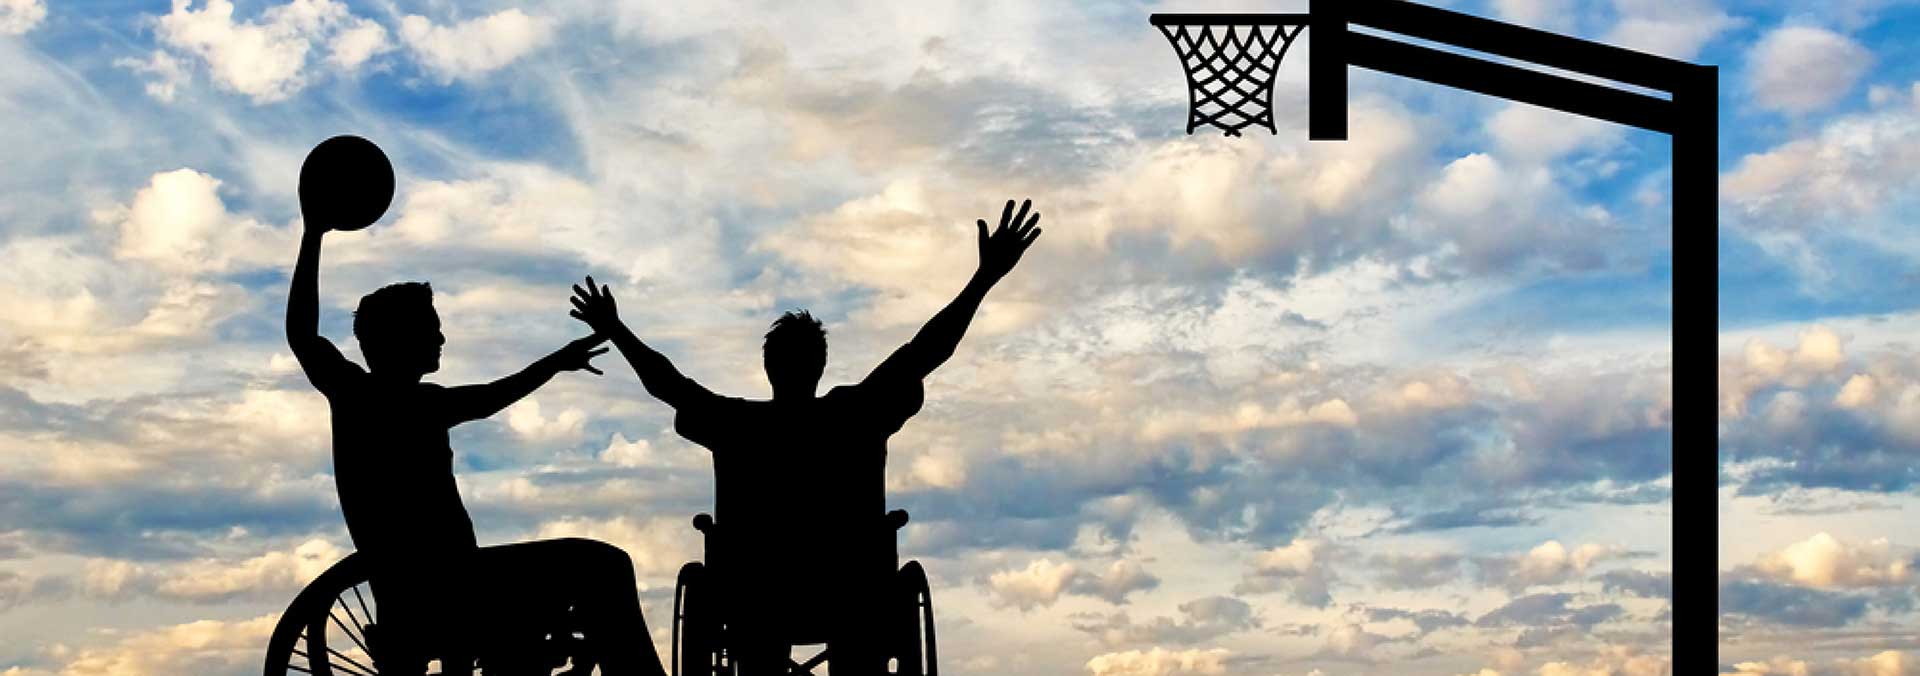 EXERCISE AND SPORTS FOR DISABLED 